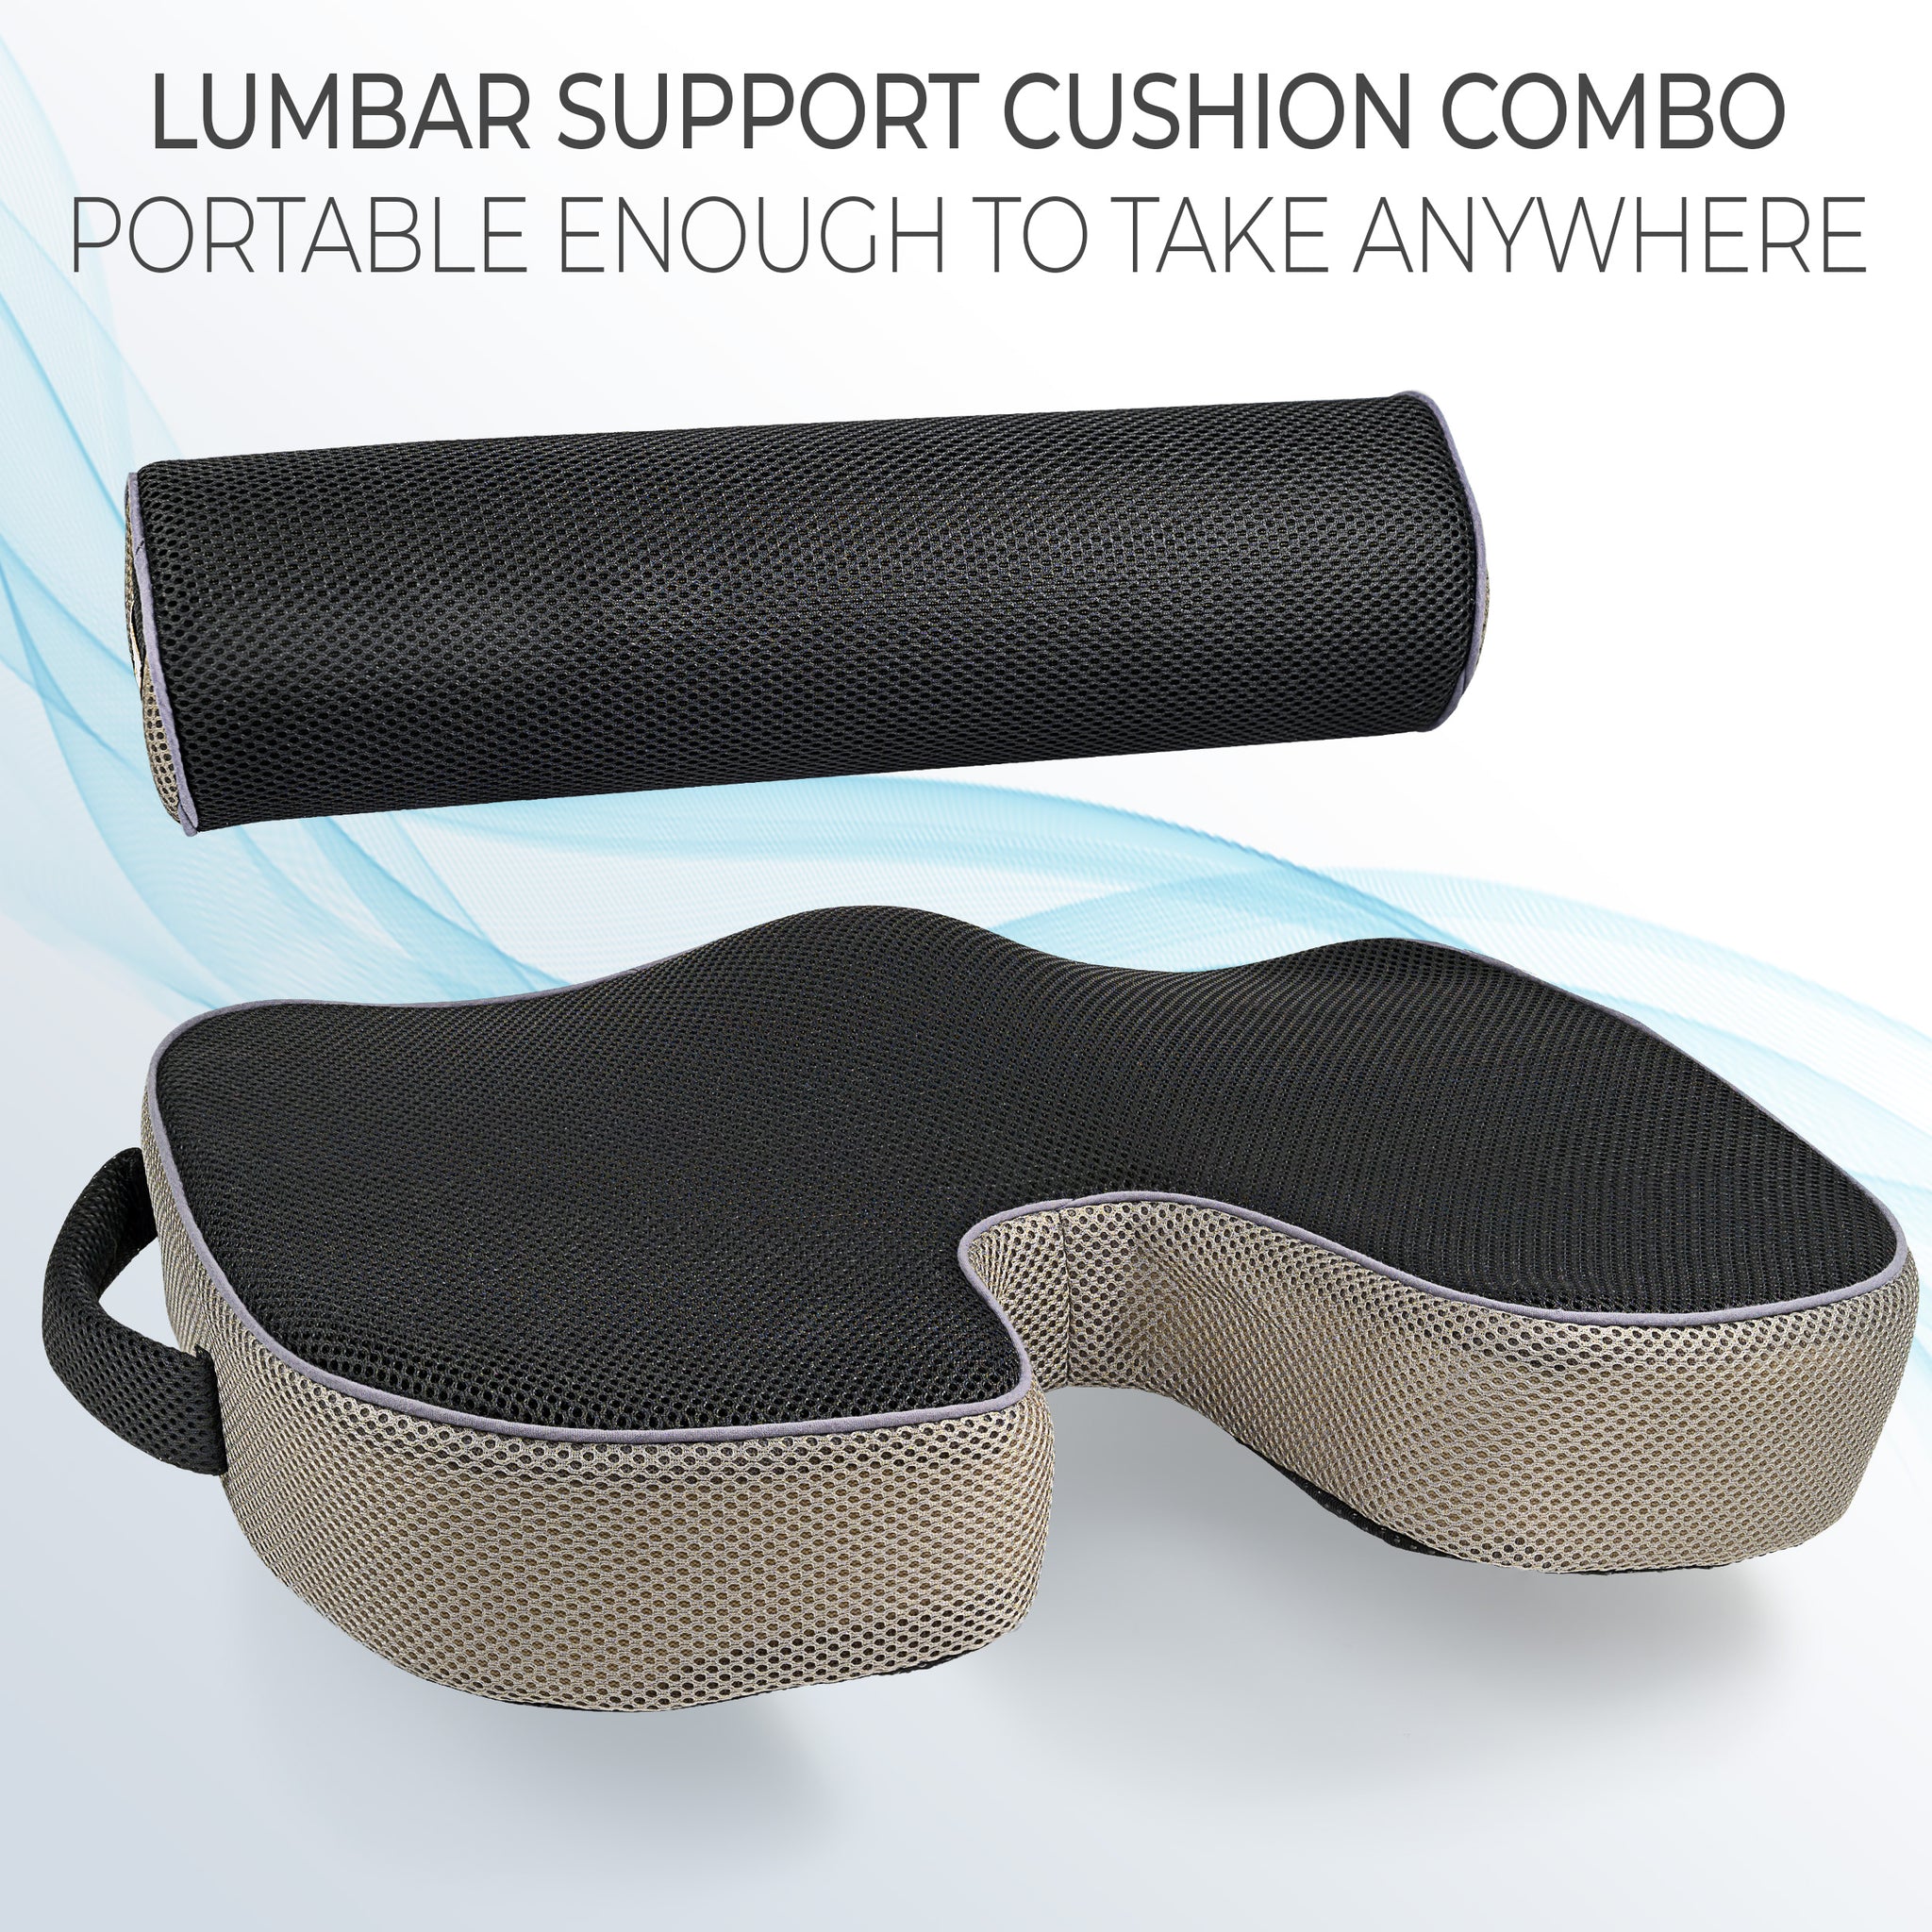 CushionCare 13 Seat Cushion and Lumbar Roll Combo for Office Chair - Memory  Foam 3D Mesh - Pain and Pressure Relief for Lower Back